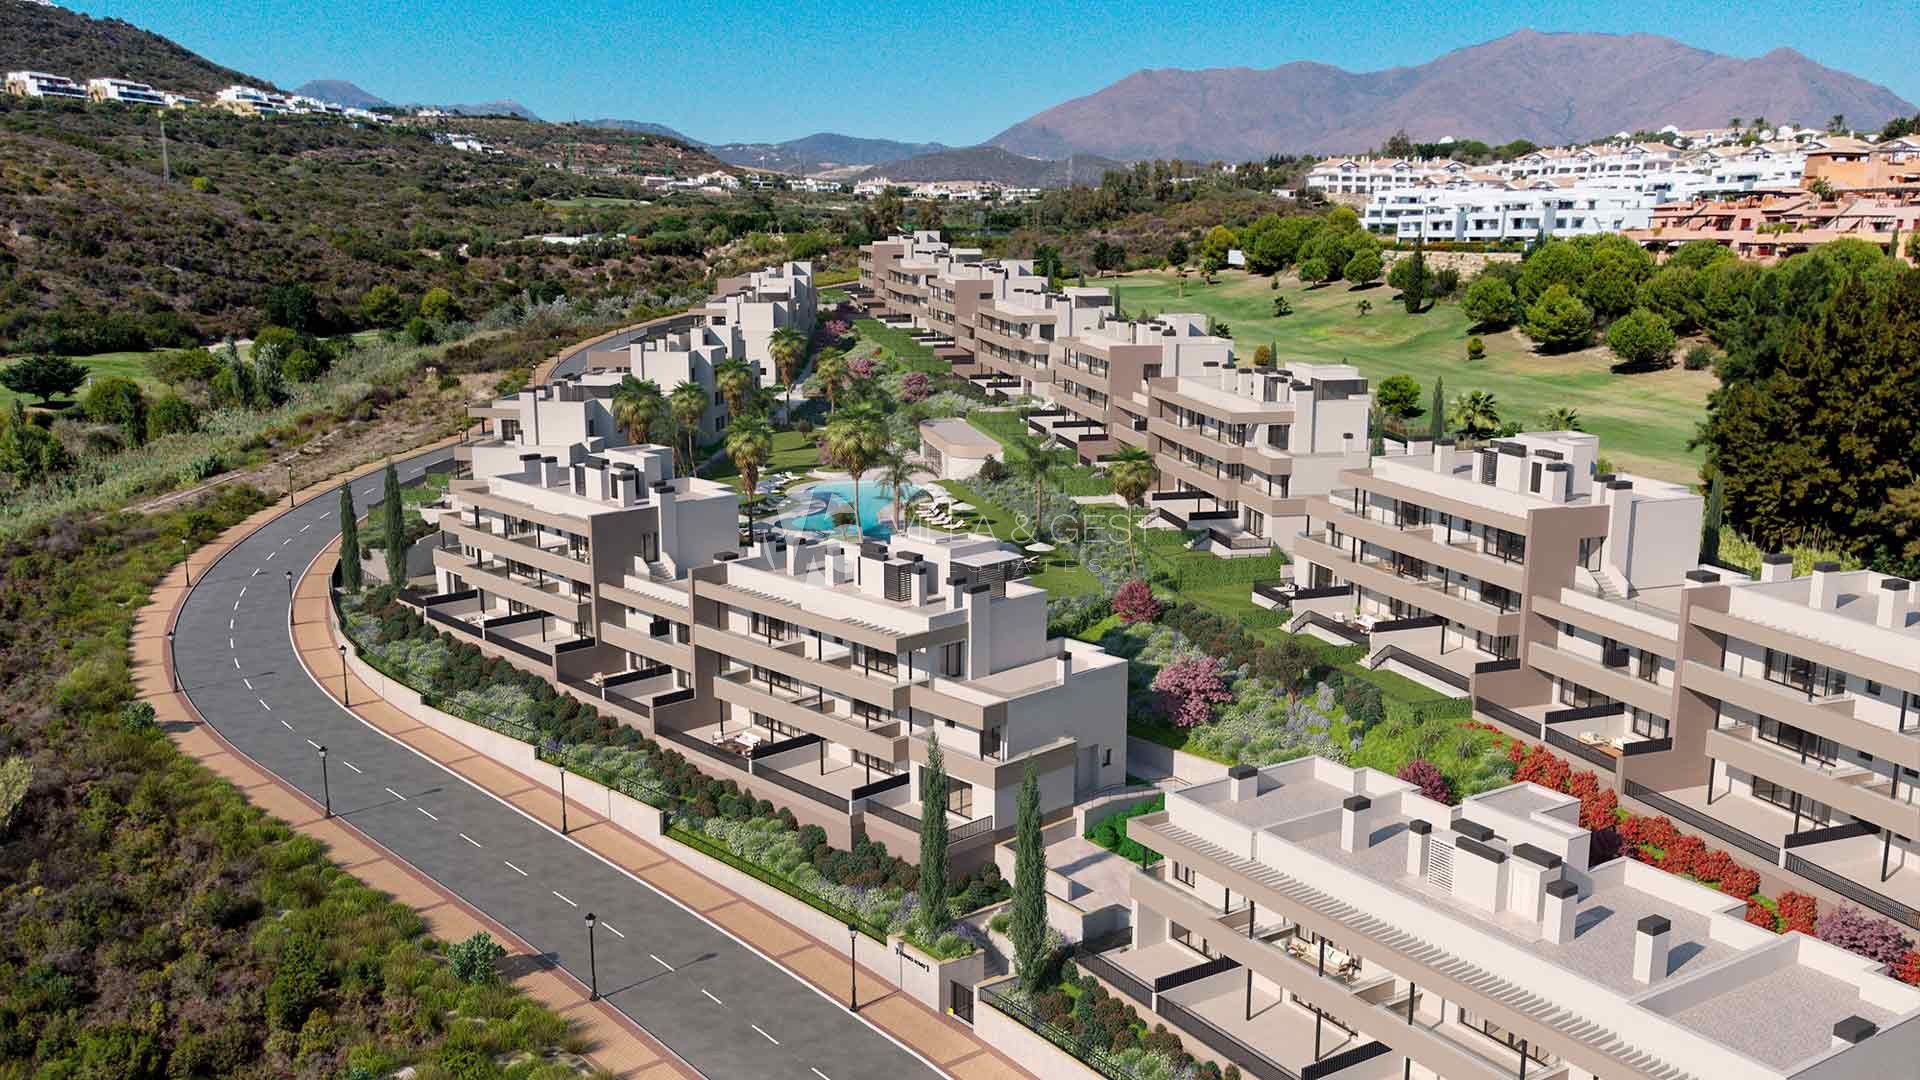 BLISS HOMES, New Development in Casares